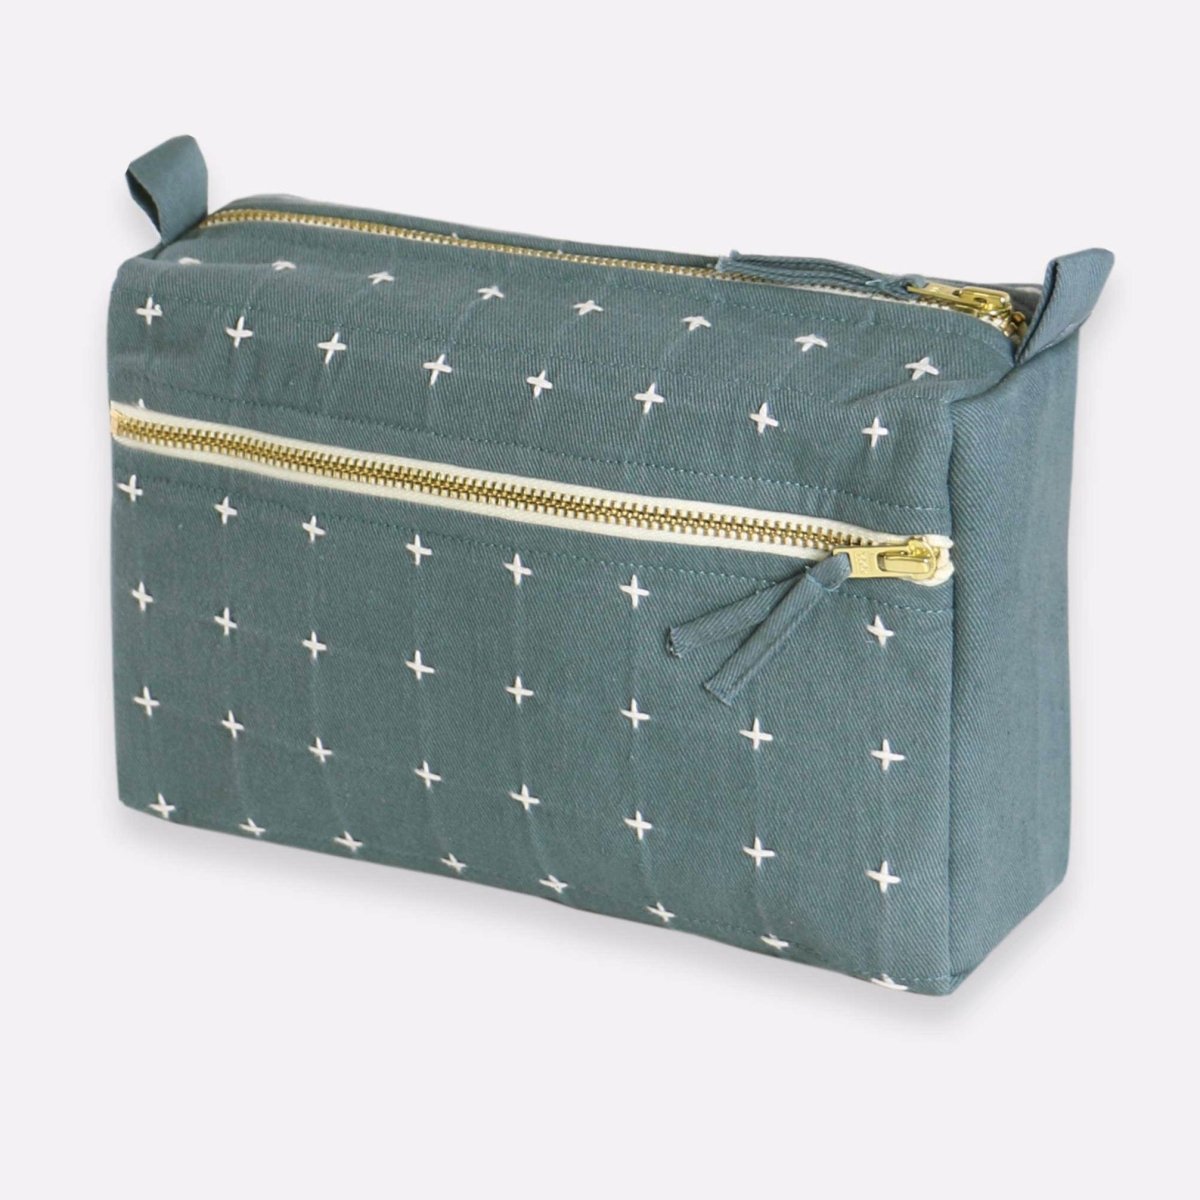 Square cross-stitch toiletry bag with side and top zipper in the shade Spruce. Designed by Anchor in Louisville, Kentucky and handmade in Ajmer, India.